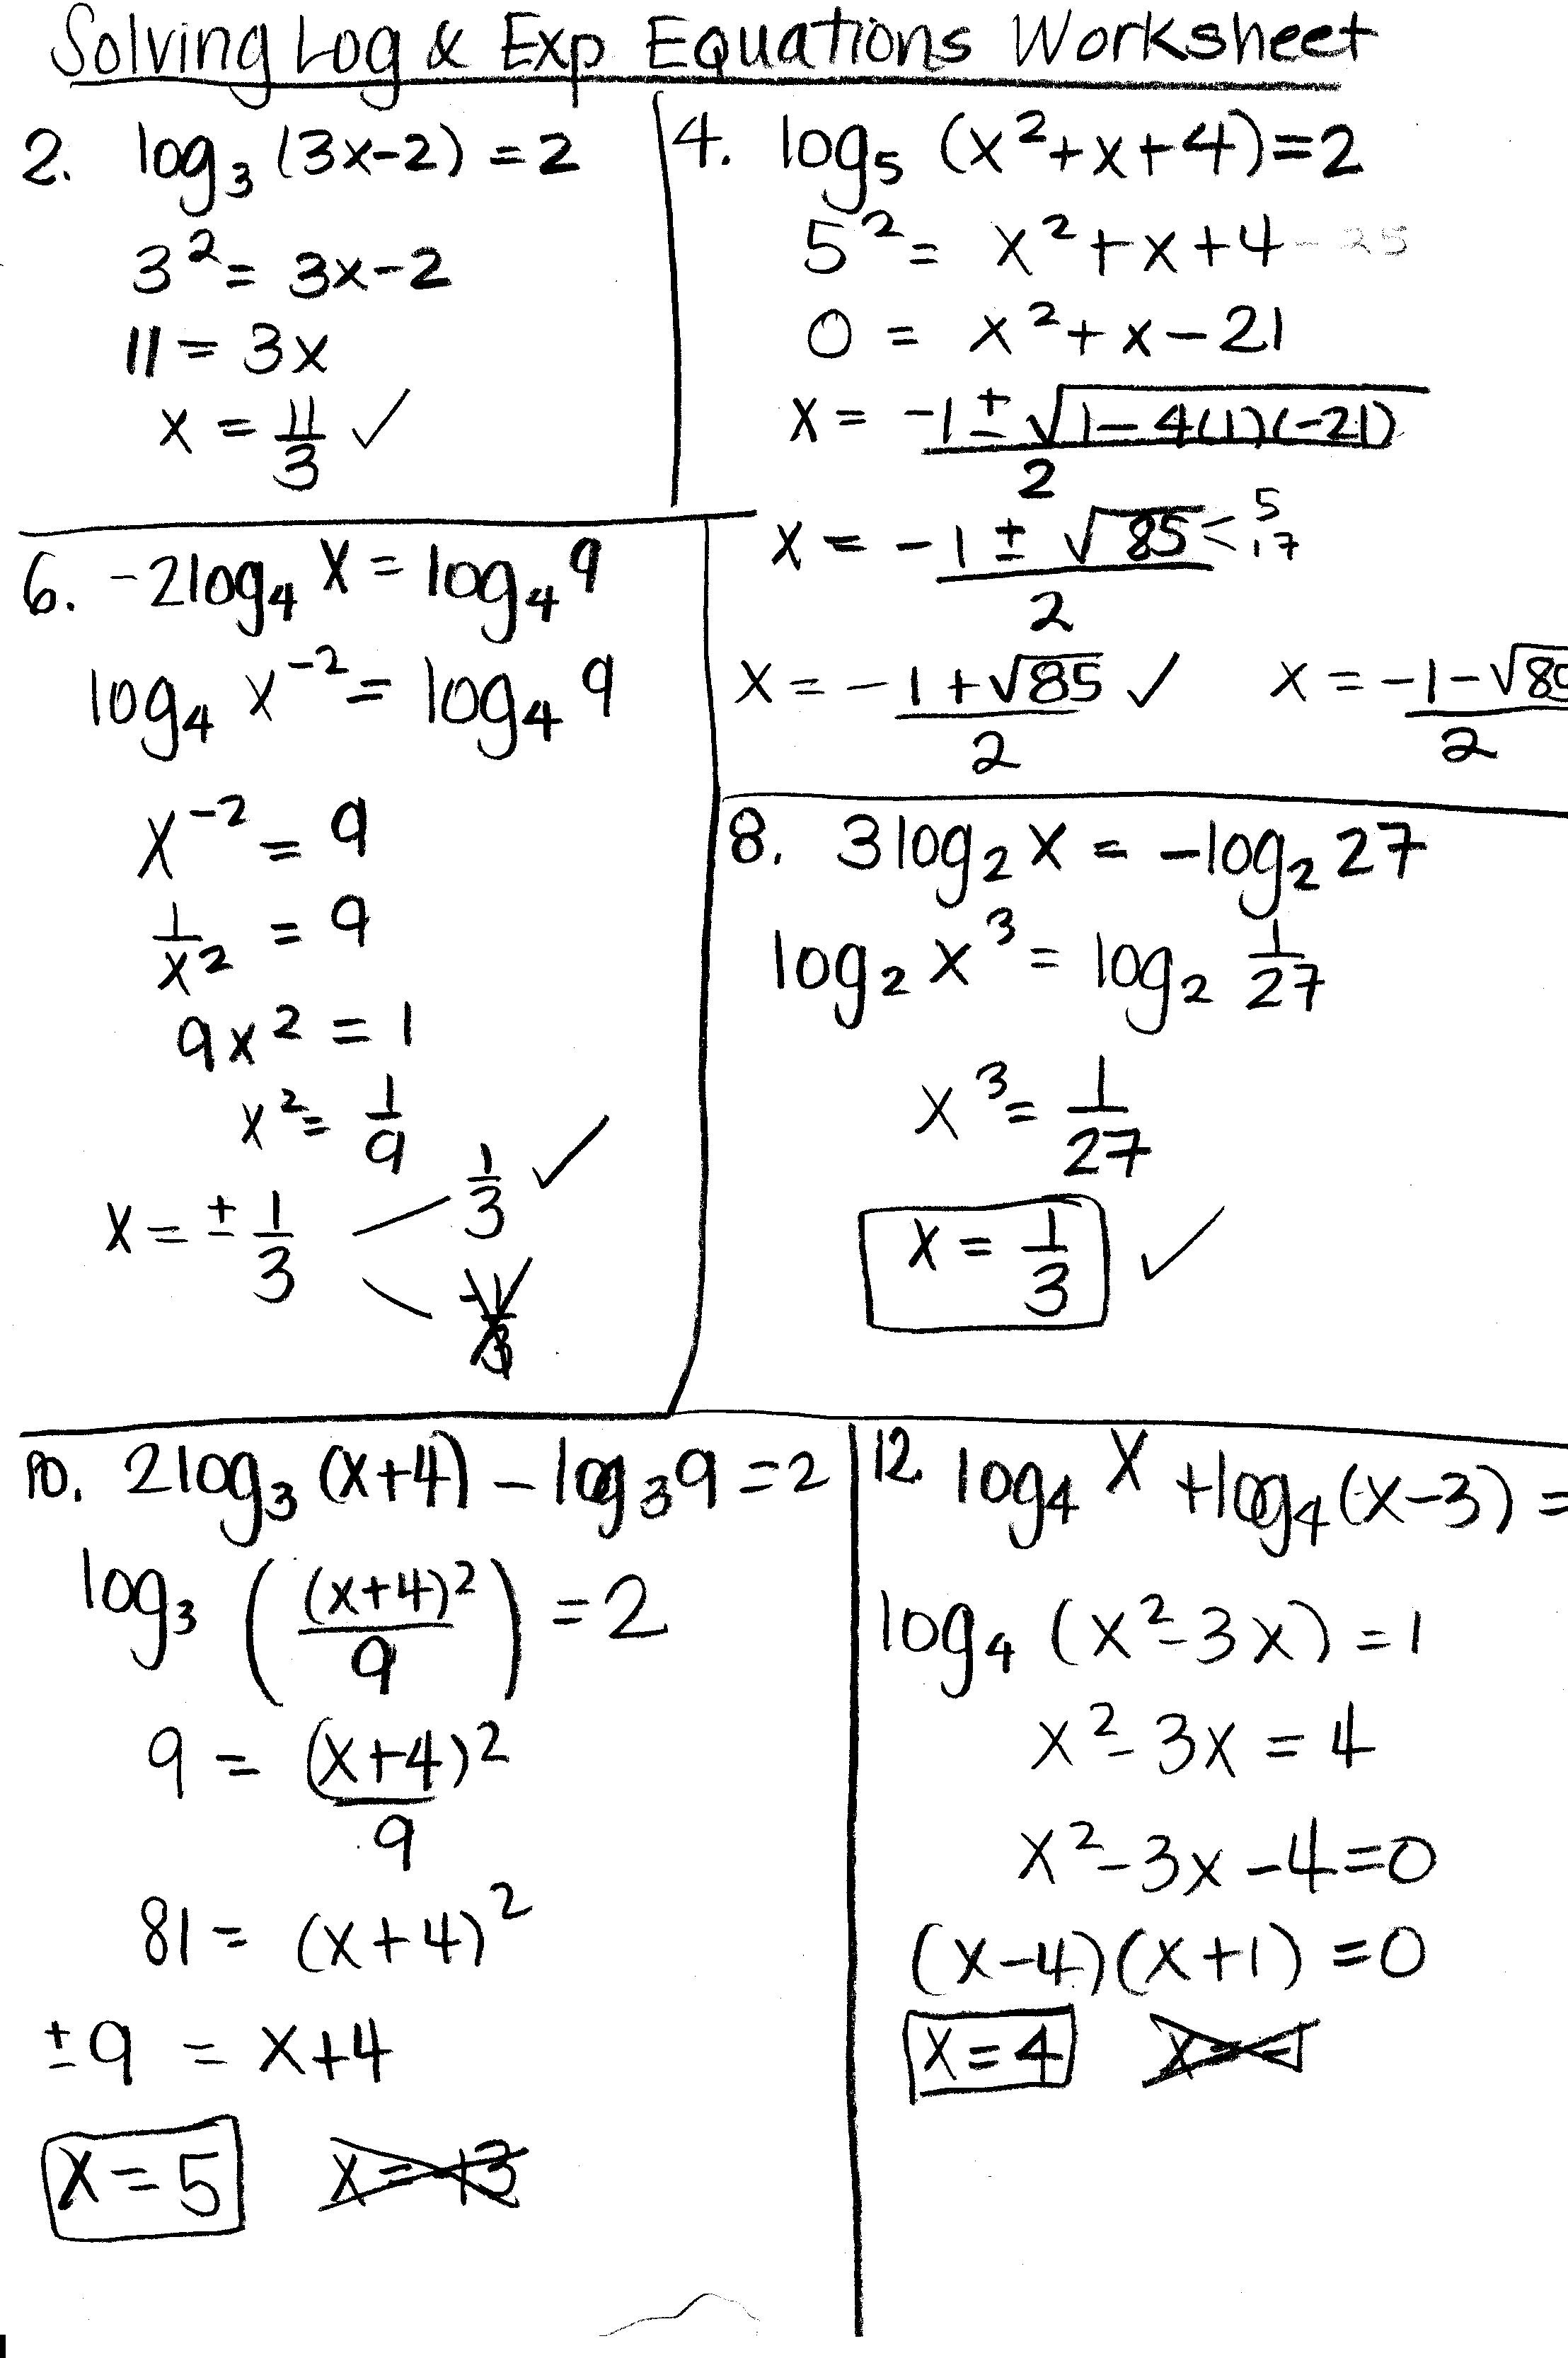 properties-of-logarithms-worksheet-answers-properties-of-logarithms